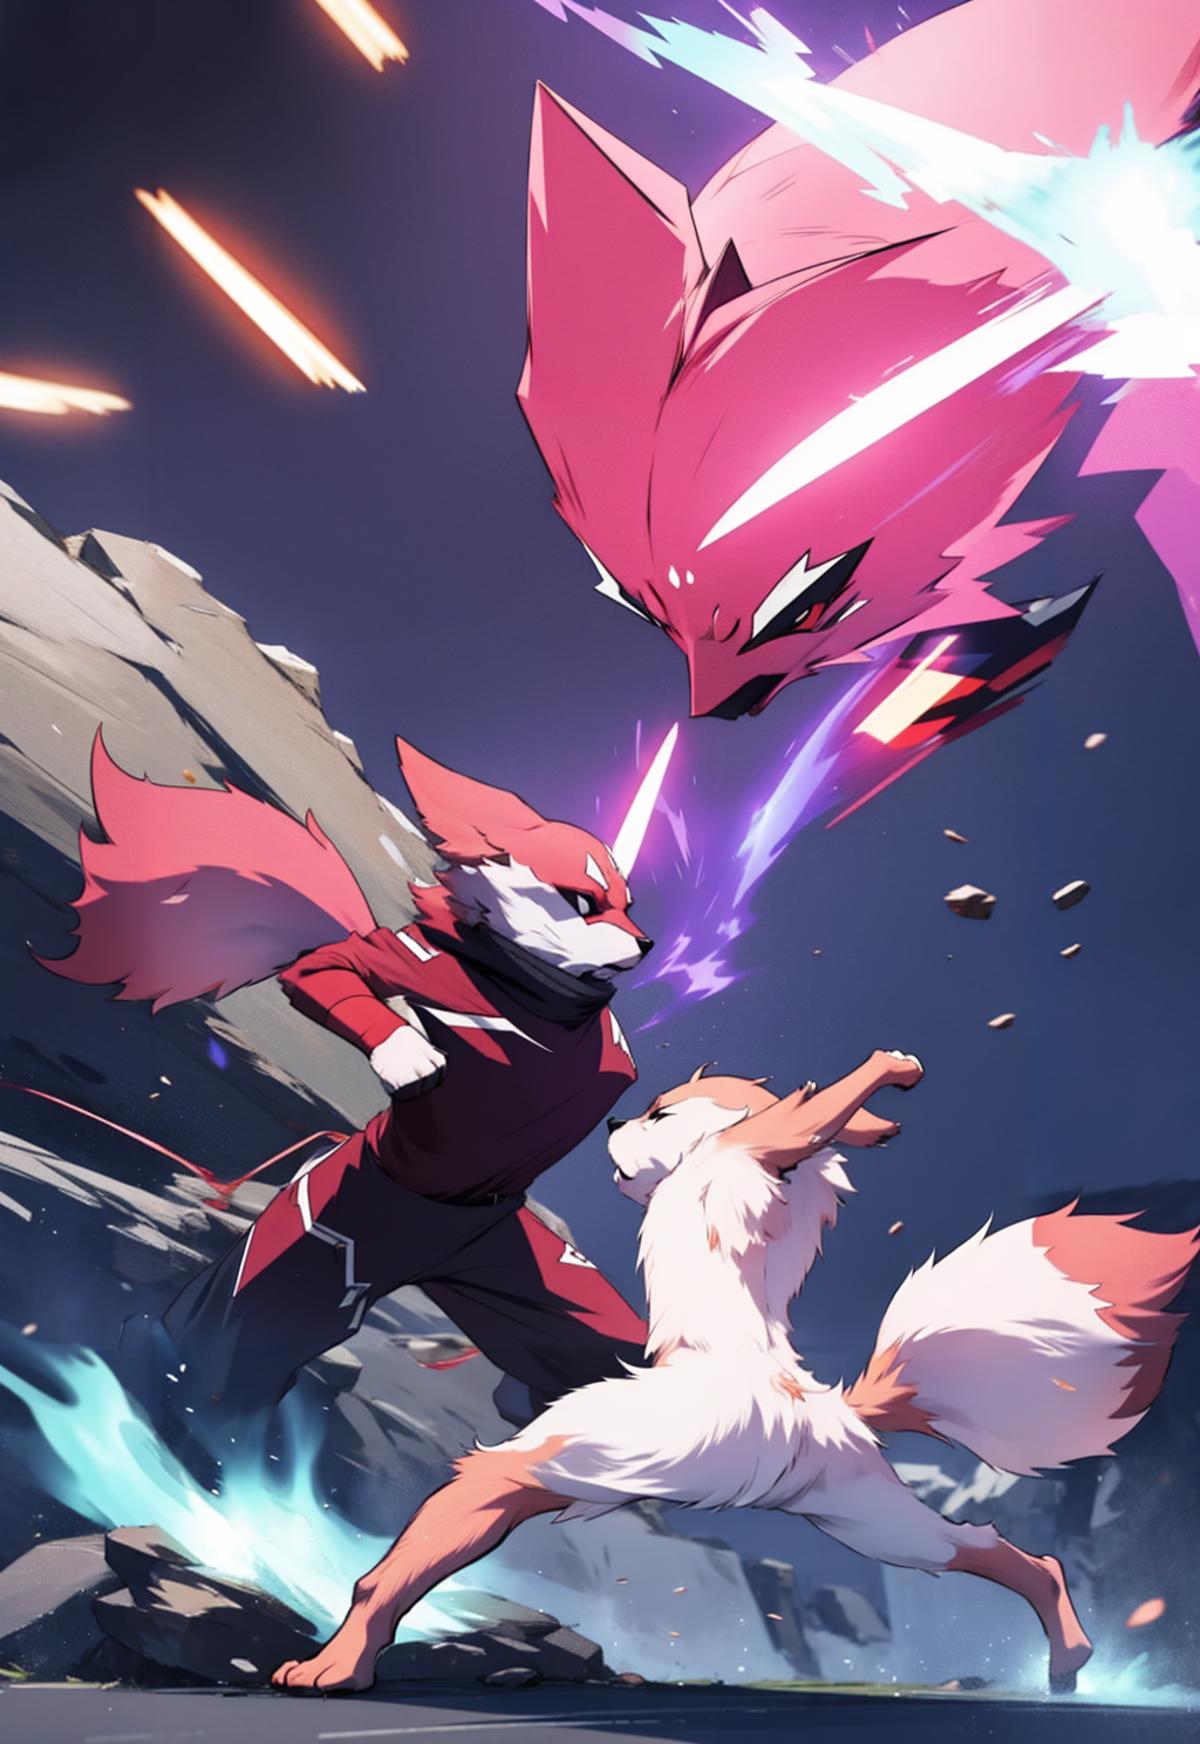 Fight scene image by yomama123556778